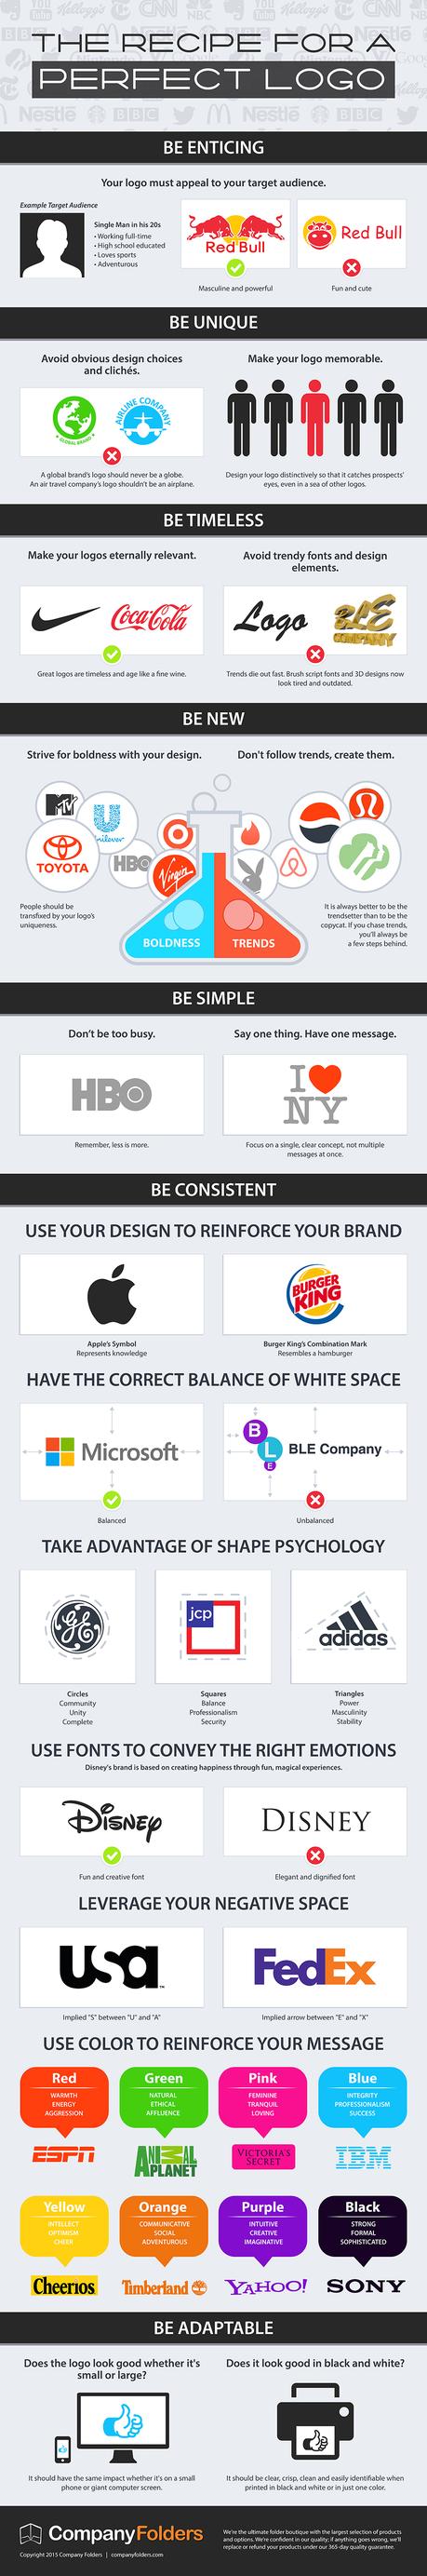 How to Design the Perfect Business Logo